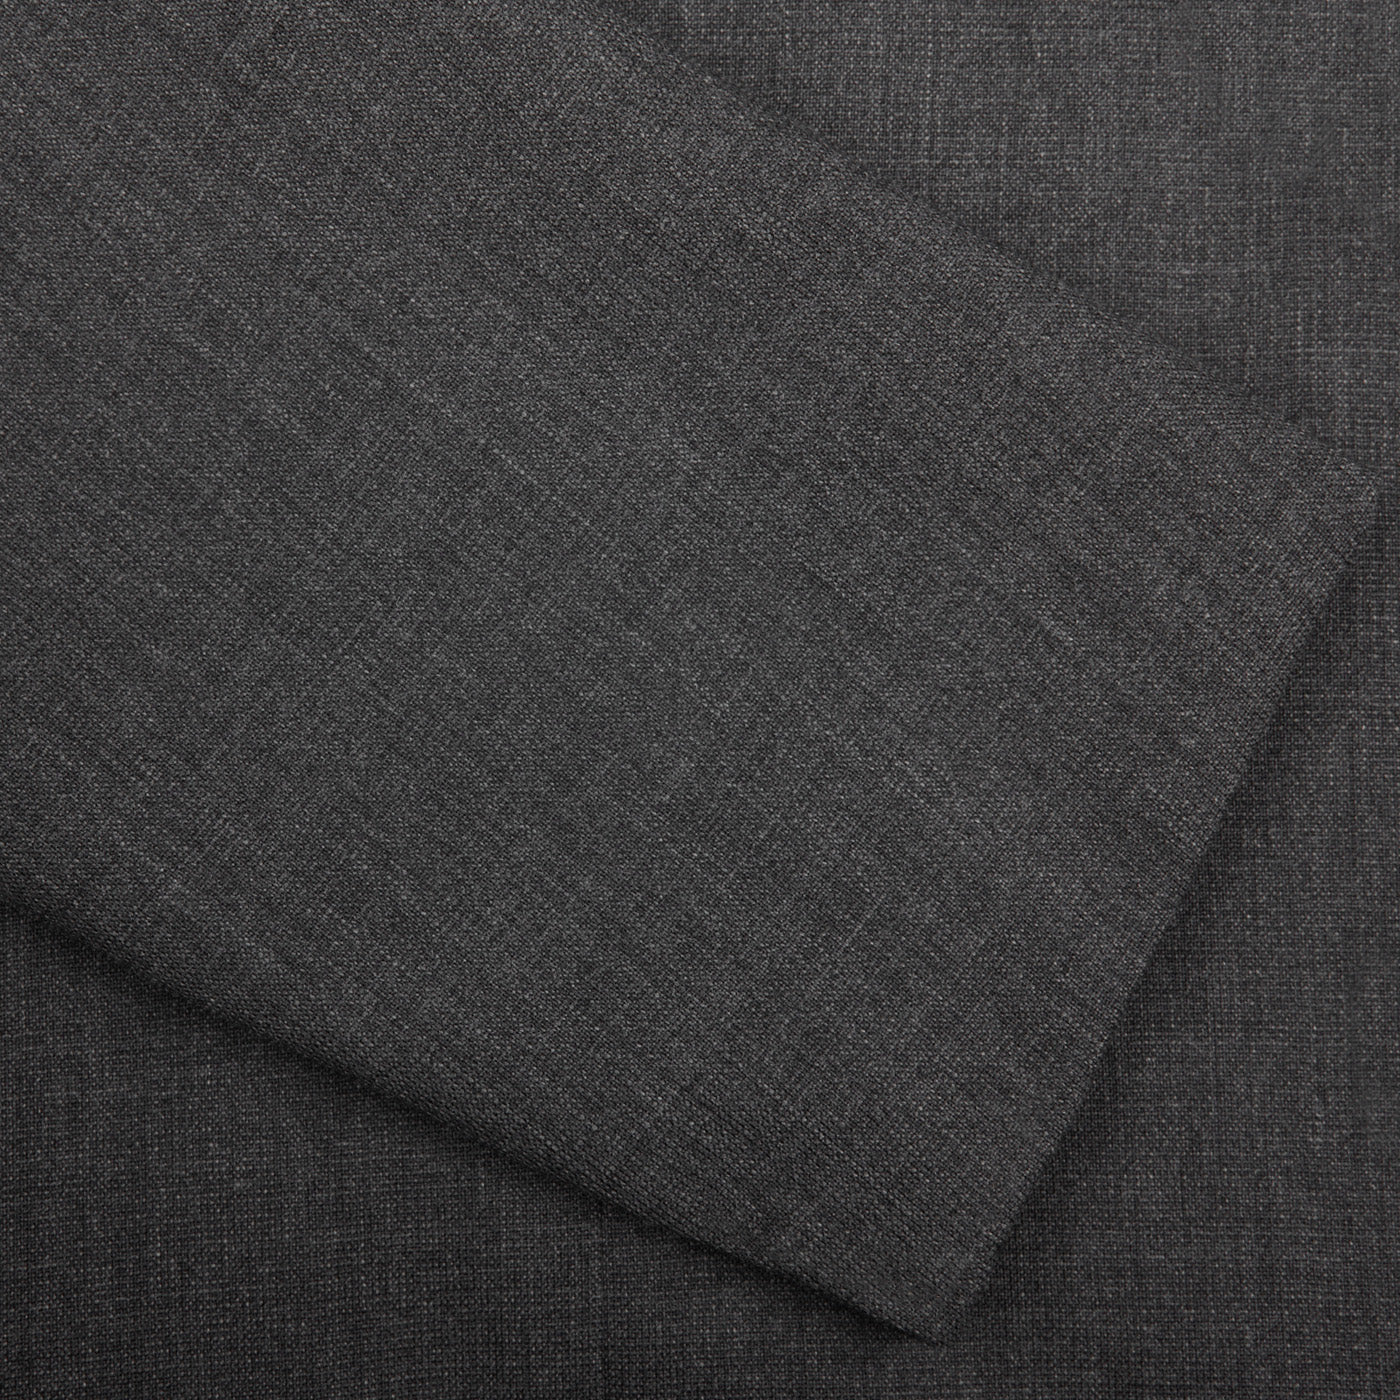 Close-up of a Ring Jacket dark grey high twist wool suit with a visible textured weave pattern.